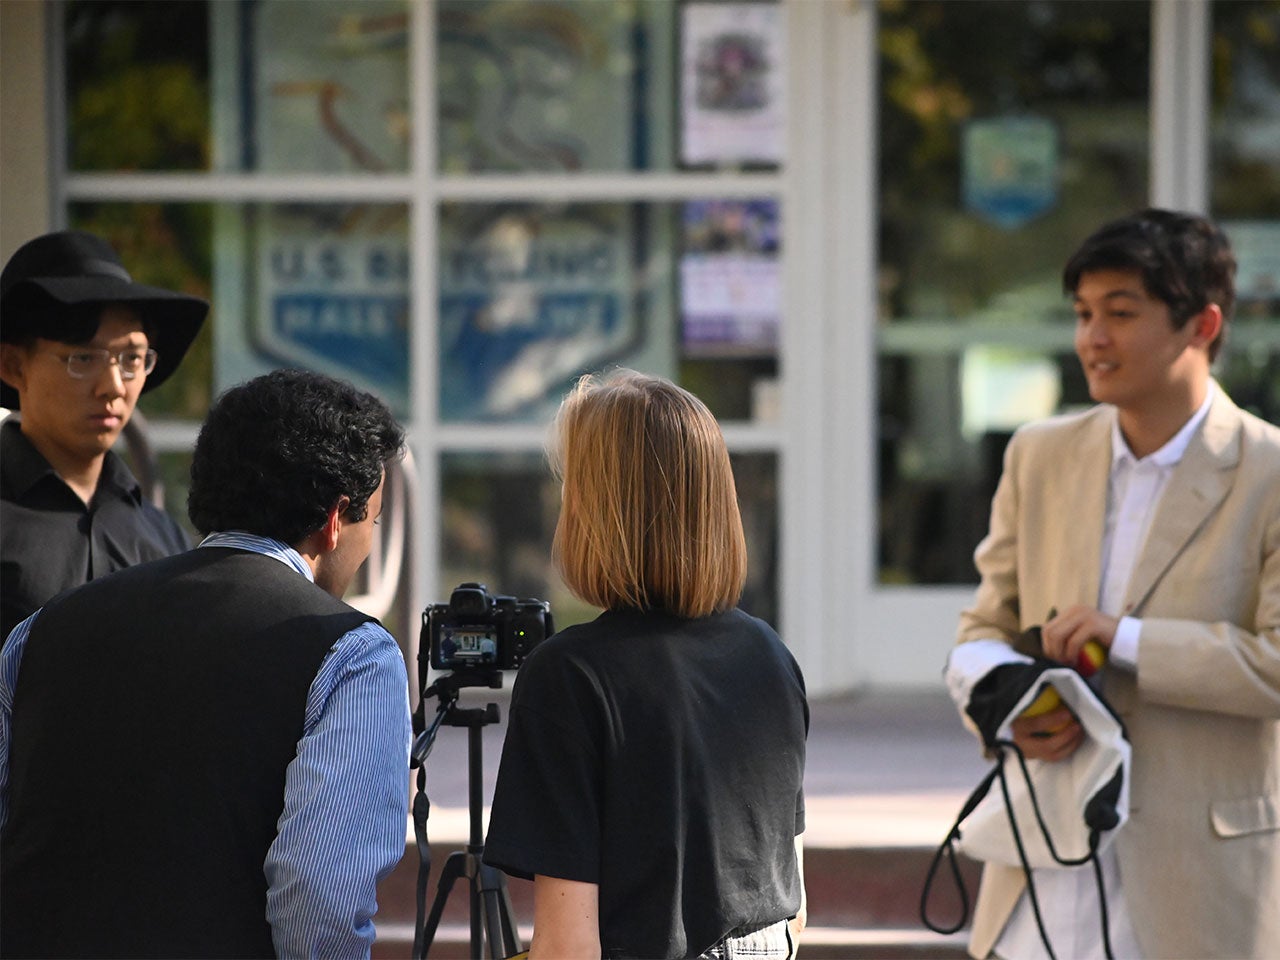 Three UC Davis students review footage while an actor waits for instruction.